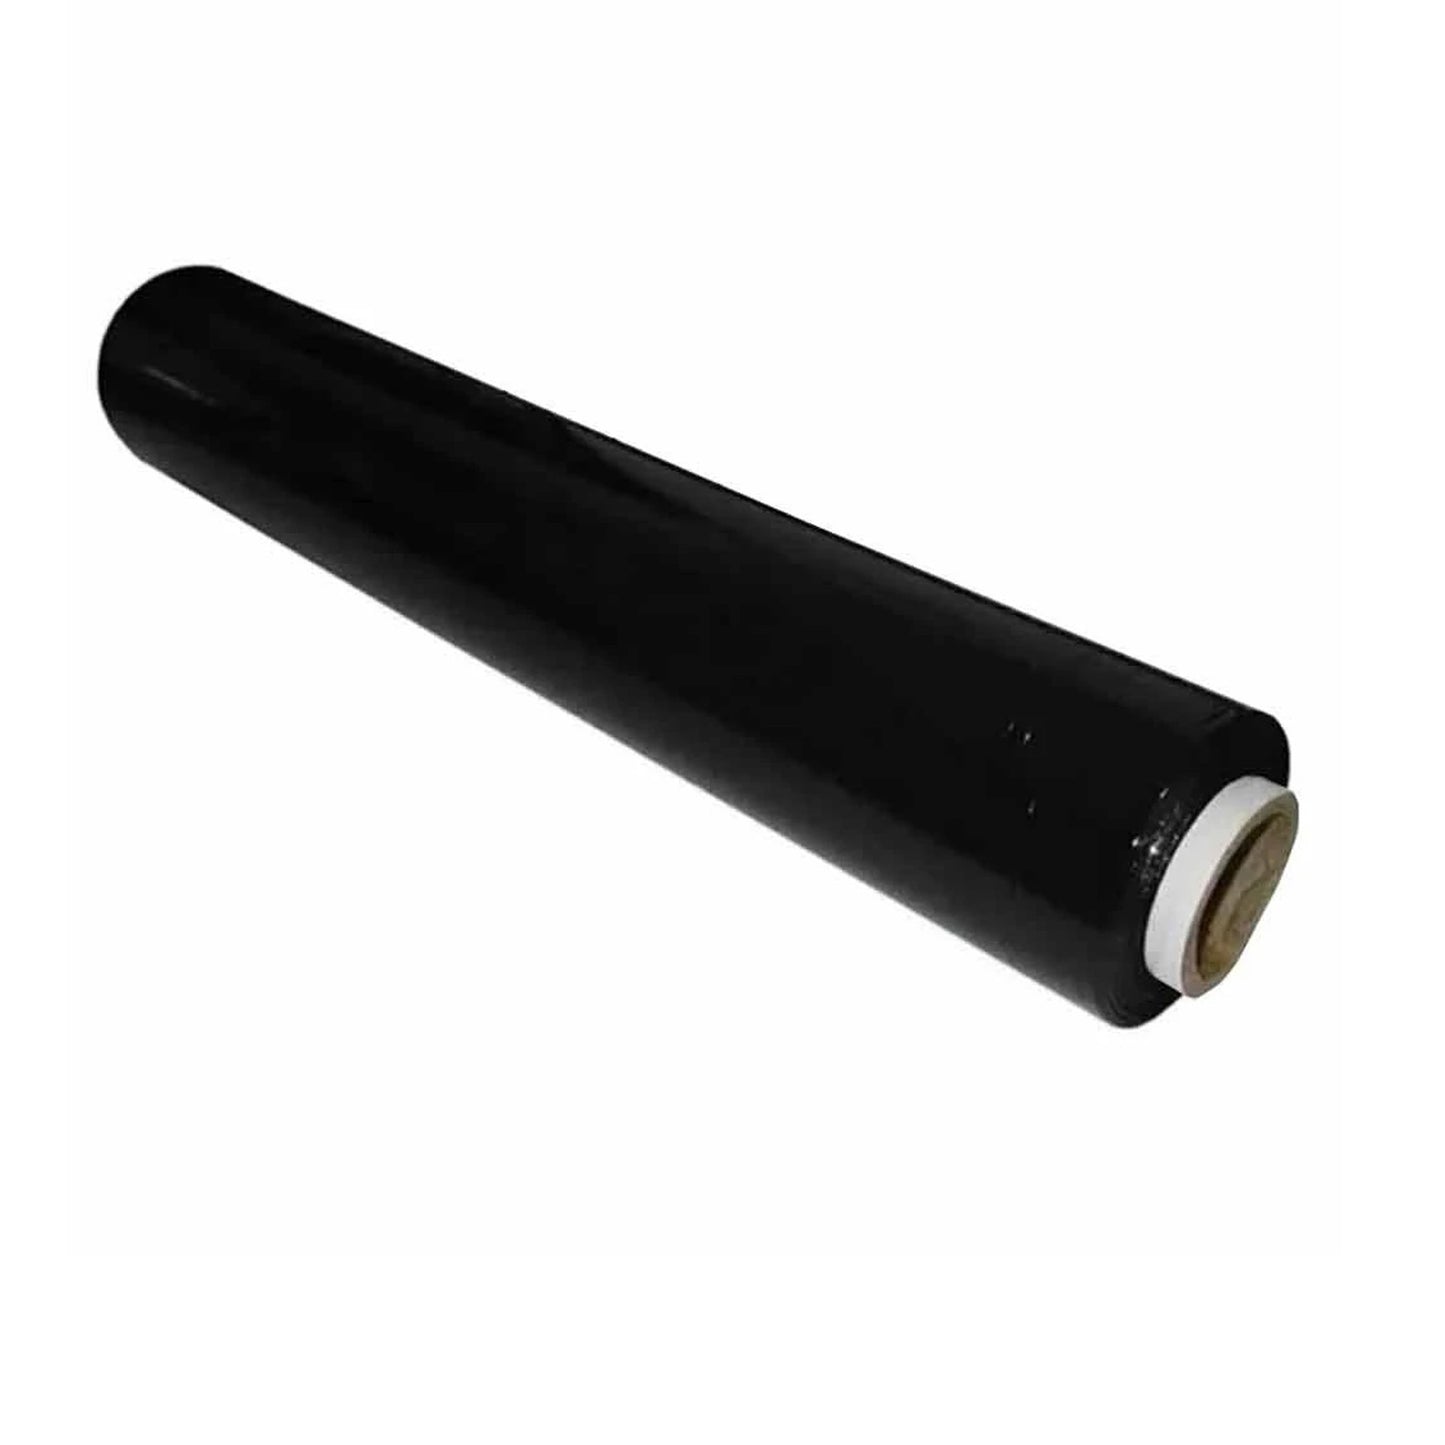 Strong Plastic Cling Film Protective Pallet Shrink Wrap Rolls